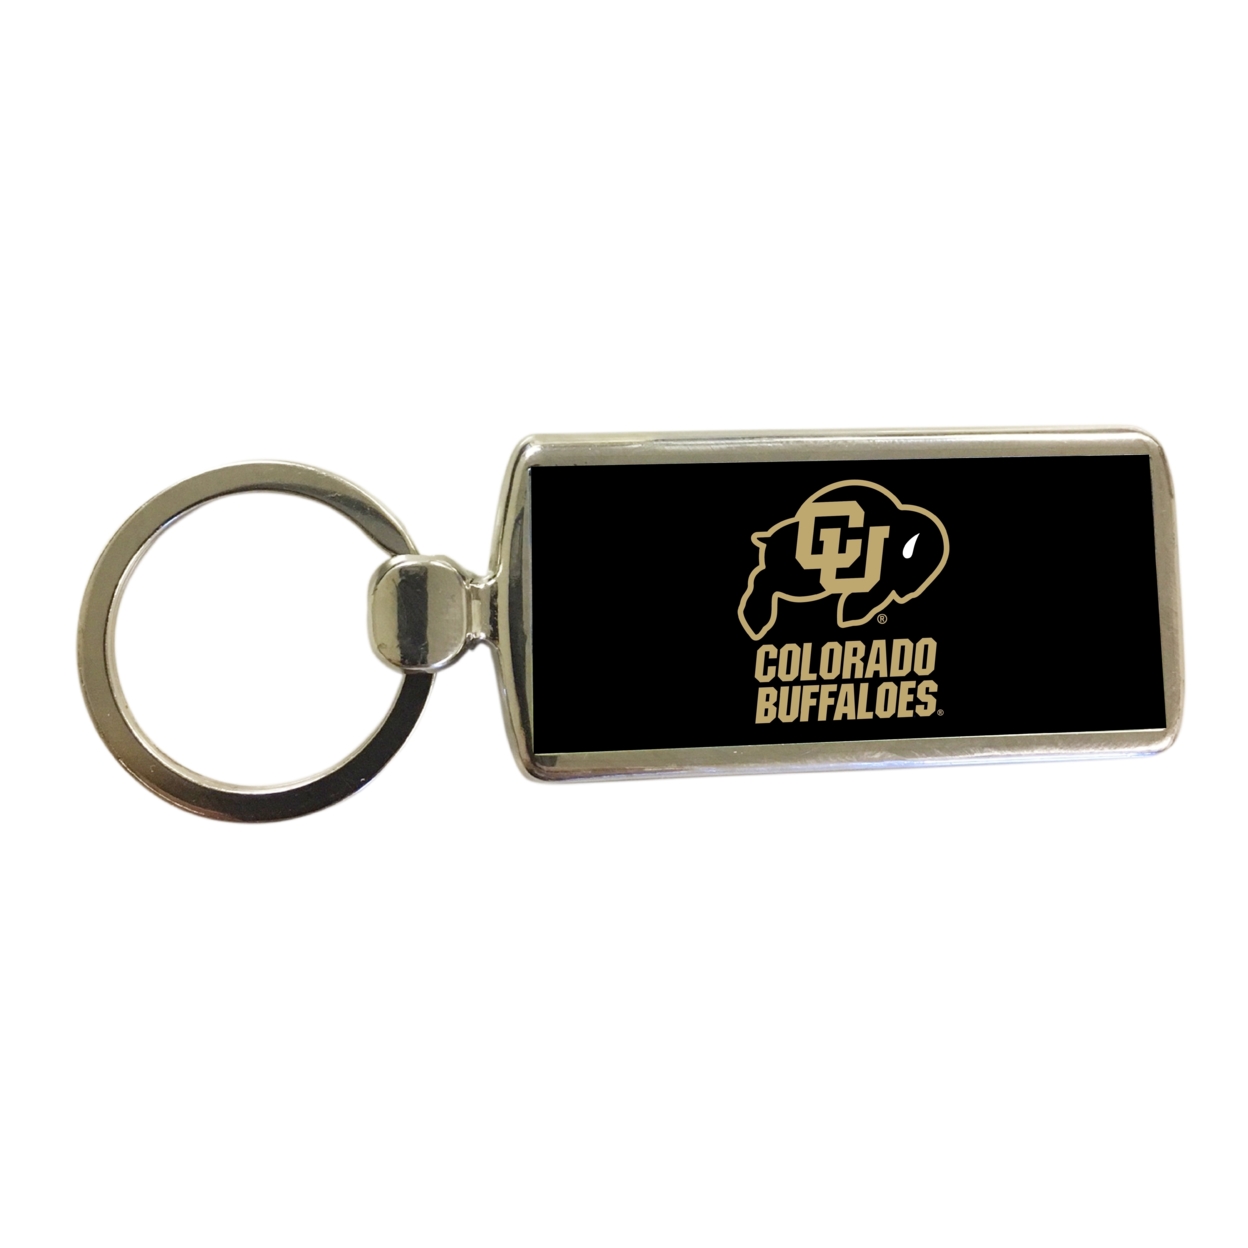 R and R Imports Colorado Buffaloes Metal Keychain